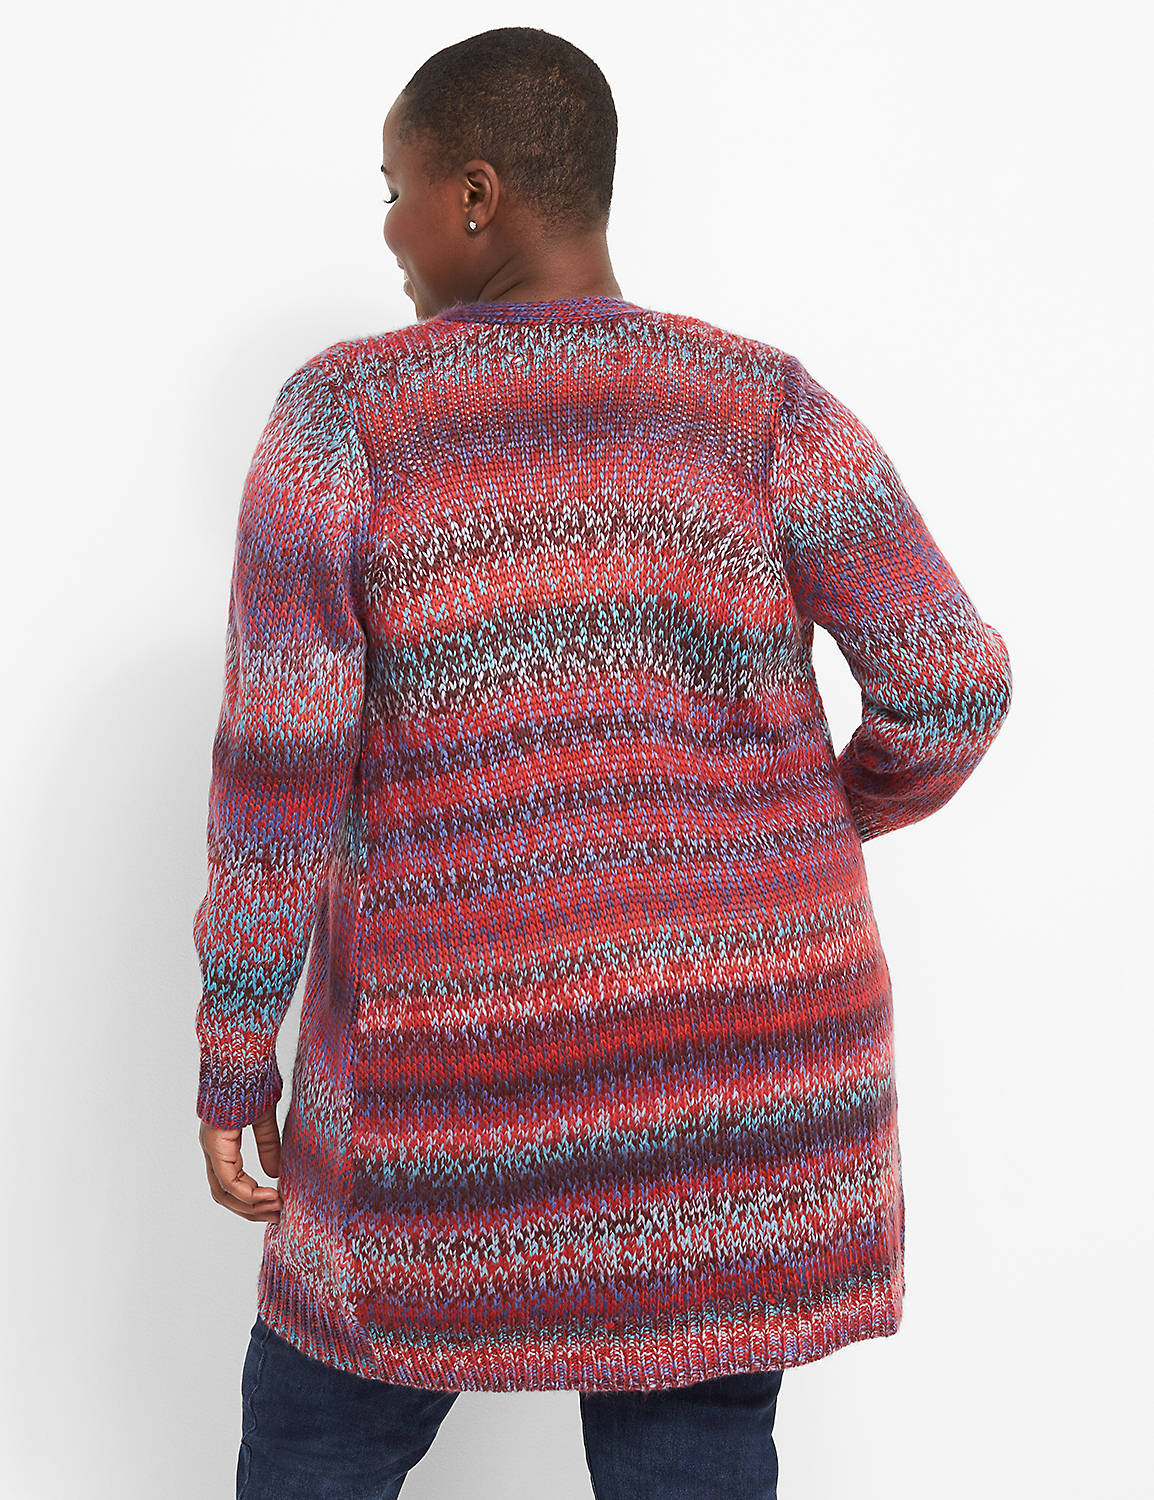 Space Dye Open Front Cardigan 1123977:Red and Blue Rainbow Spacedye:10/12 Product Image 2